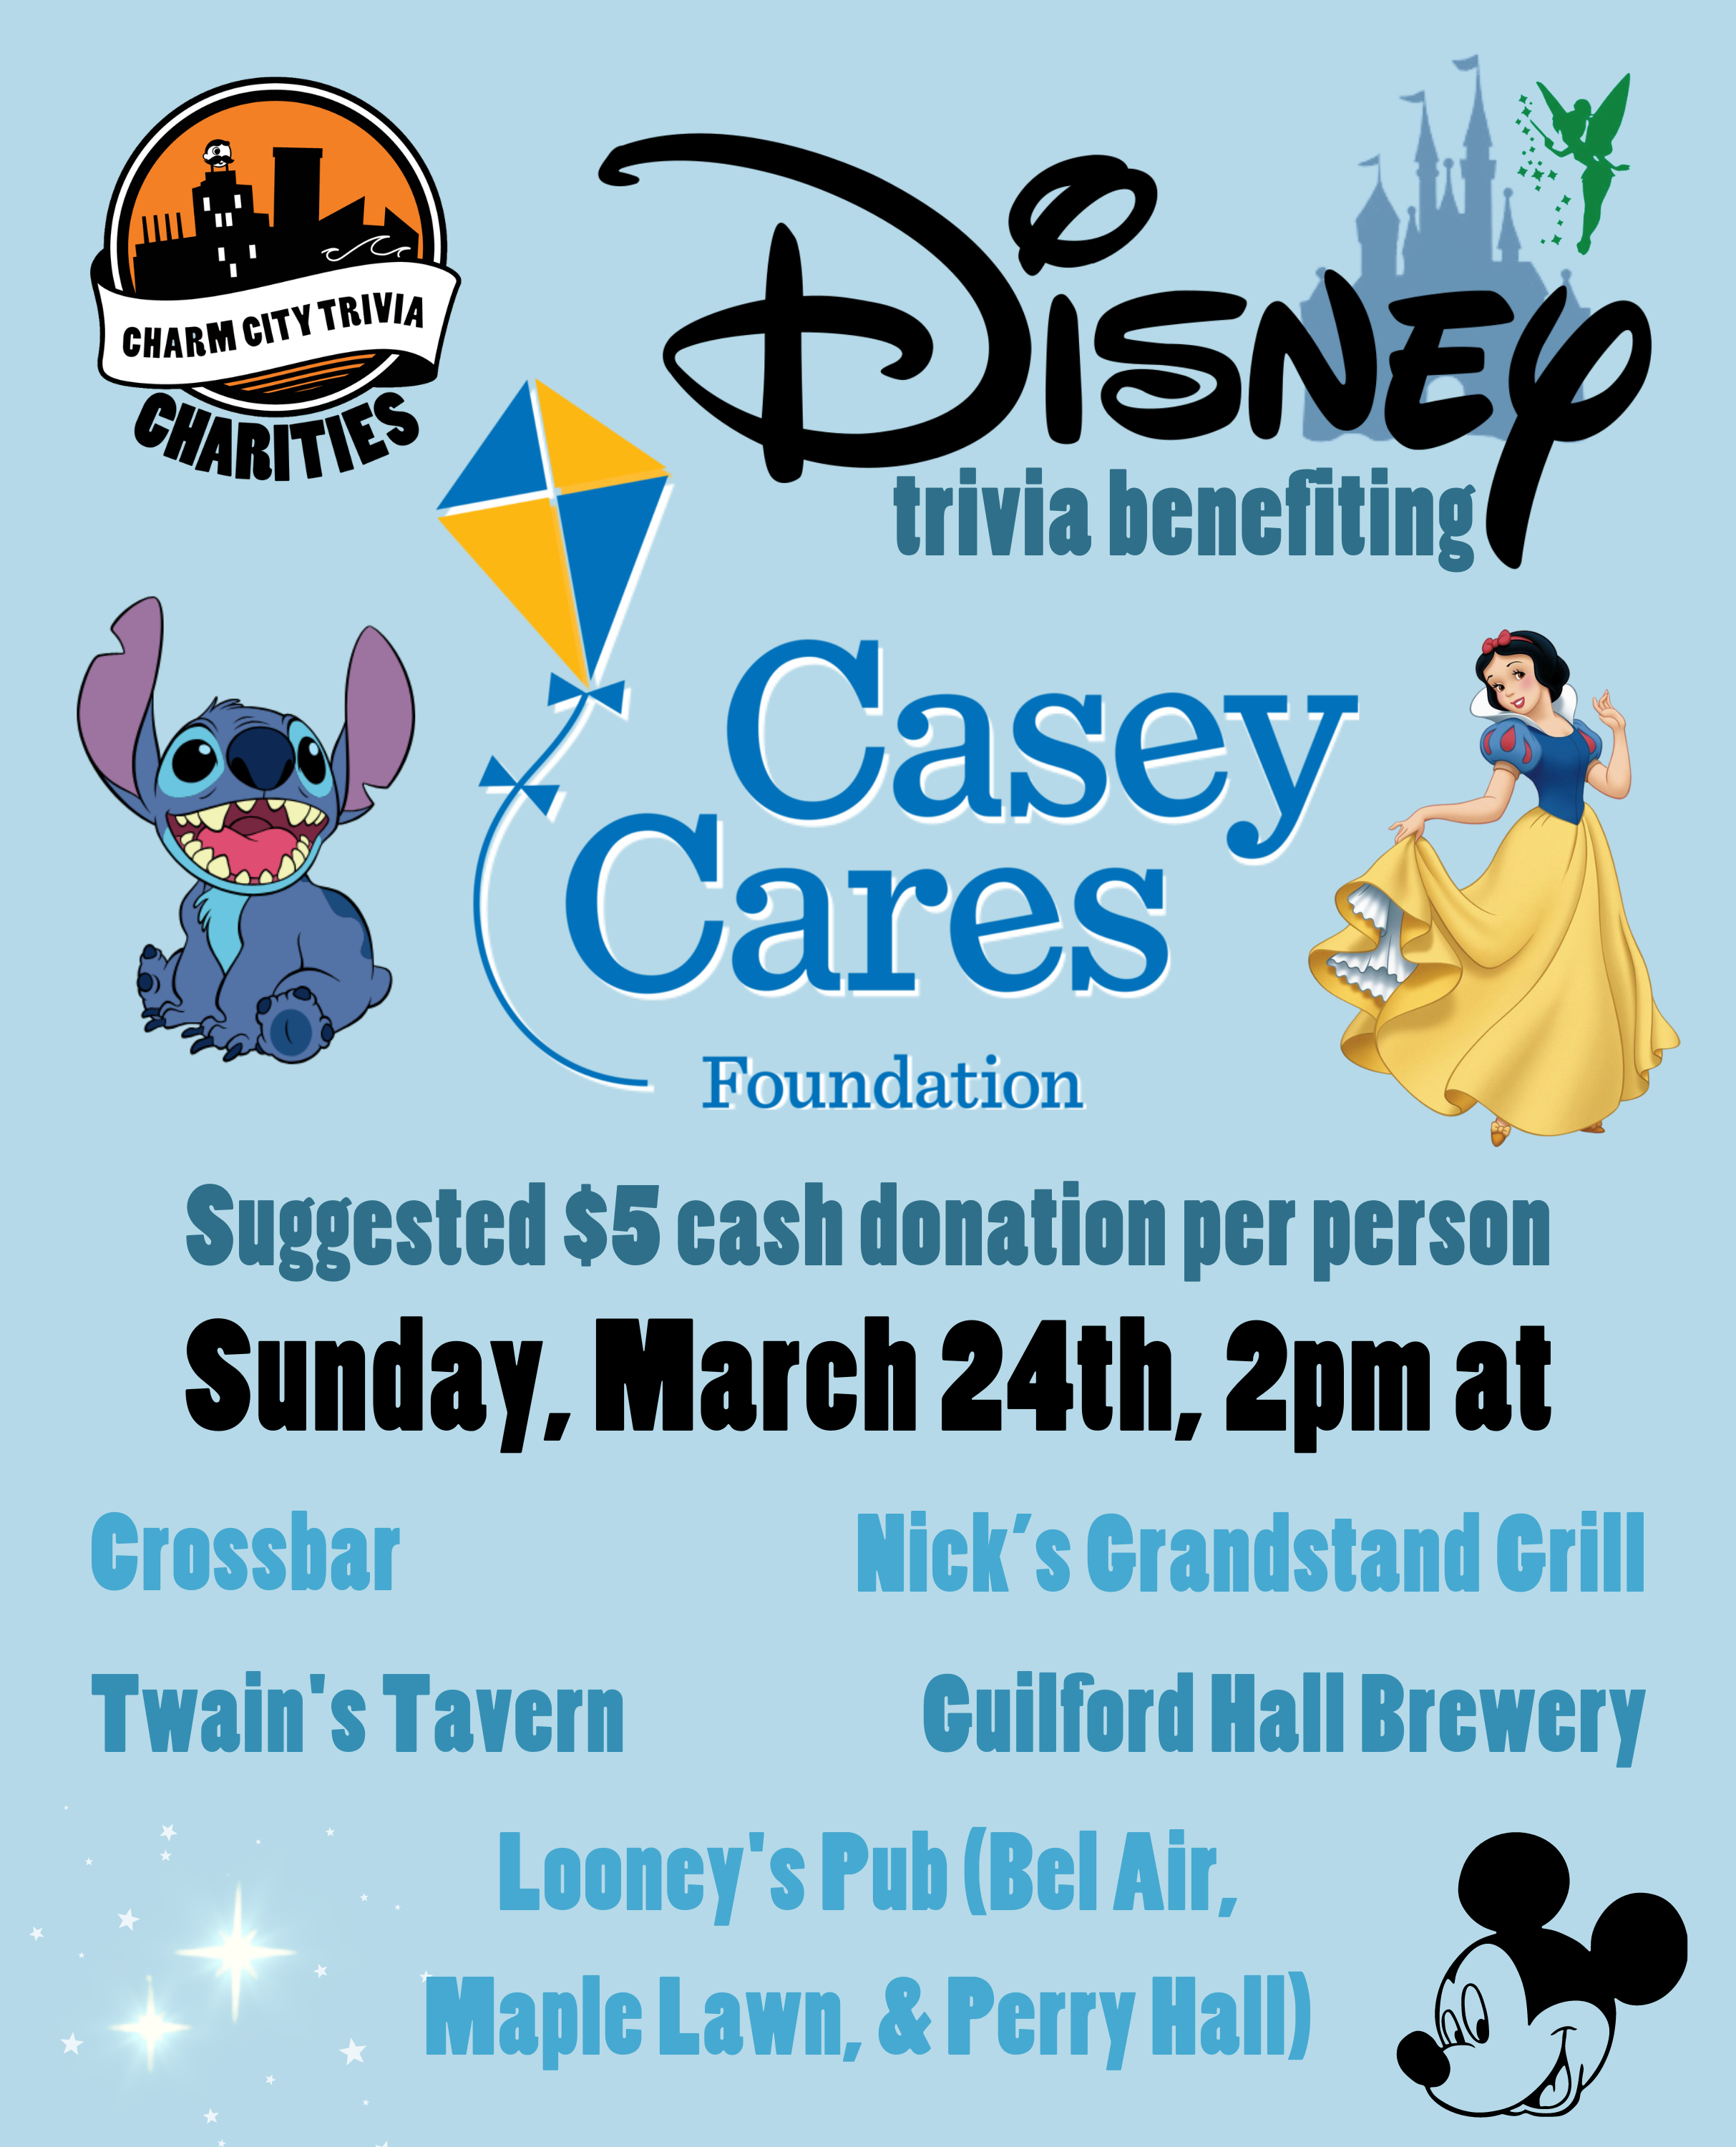 a light blue background with the Charm City Trivia Charities logo, the Casey Cares logo, the Disney logo, the Disney castle, Tinker Bell, Snow White, Stitch, Mickey Mouse, the stars from Peter Pan, and medium blue, dark blue, and black text. The text reads: Disney trivia benefiting Casey Cares. Suggested $5 cash donation per person. Sunday, March 24th, 2pm at. Crossbar. Guilford Hall Brewery. Nick's Grandstand Grill. Twain's Tavern. Looney's Pub (Bel Air, Maple Lawn, & Perry Hall)